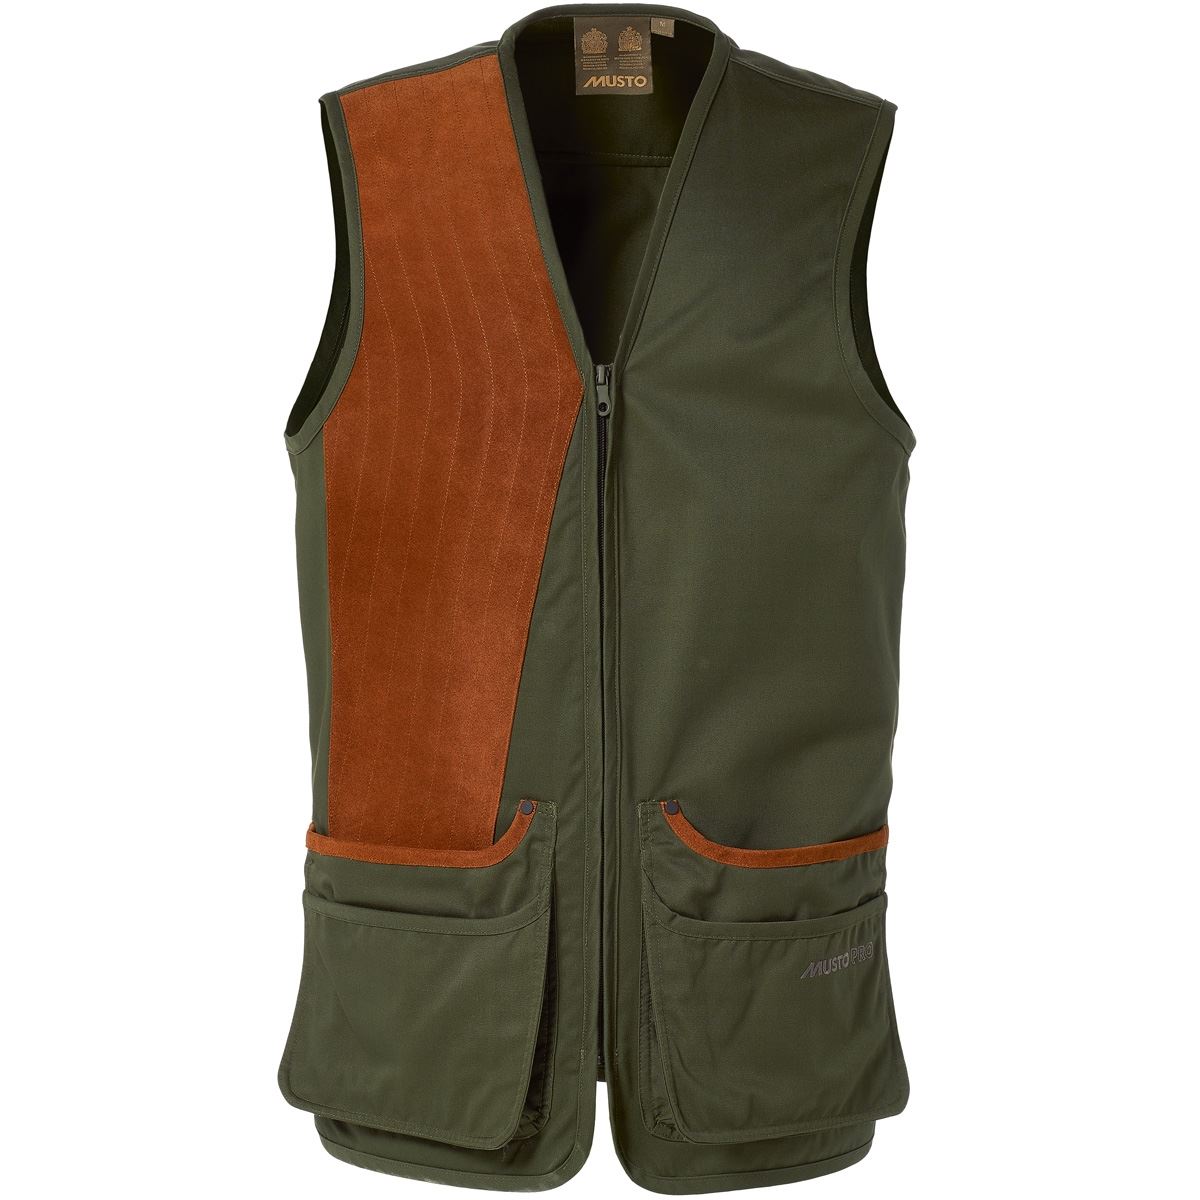 Is accessing cartridge pockets on the Musto shooting vest easy?